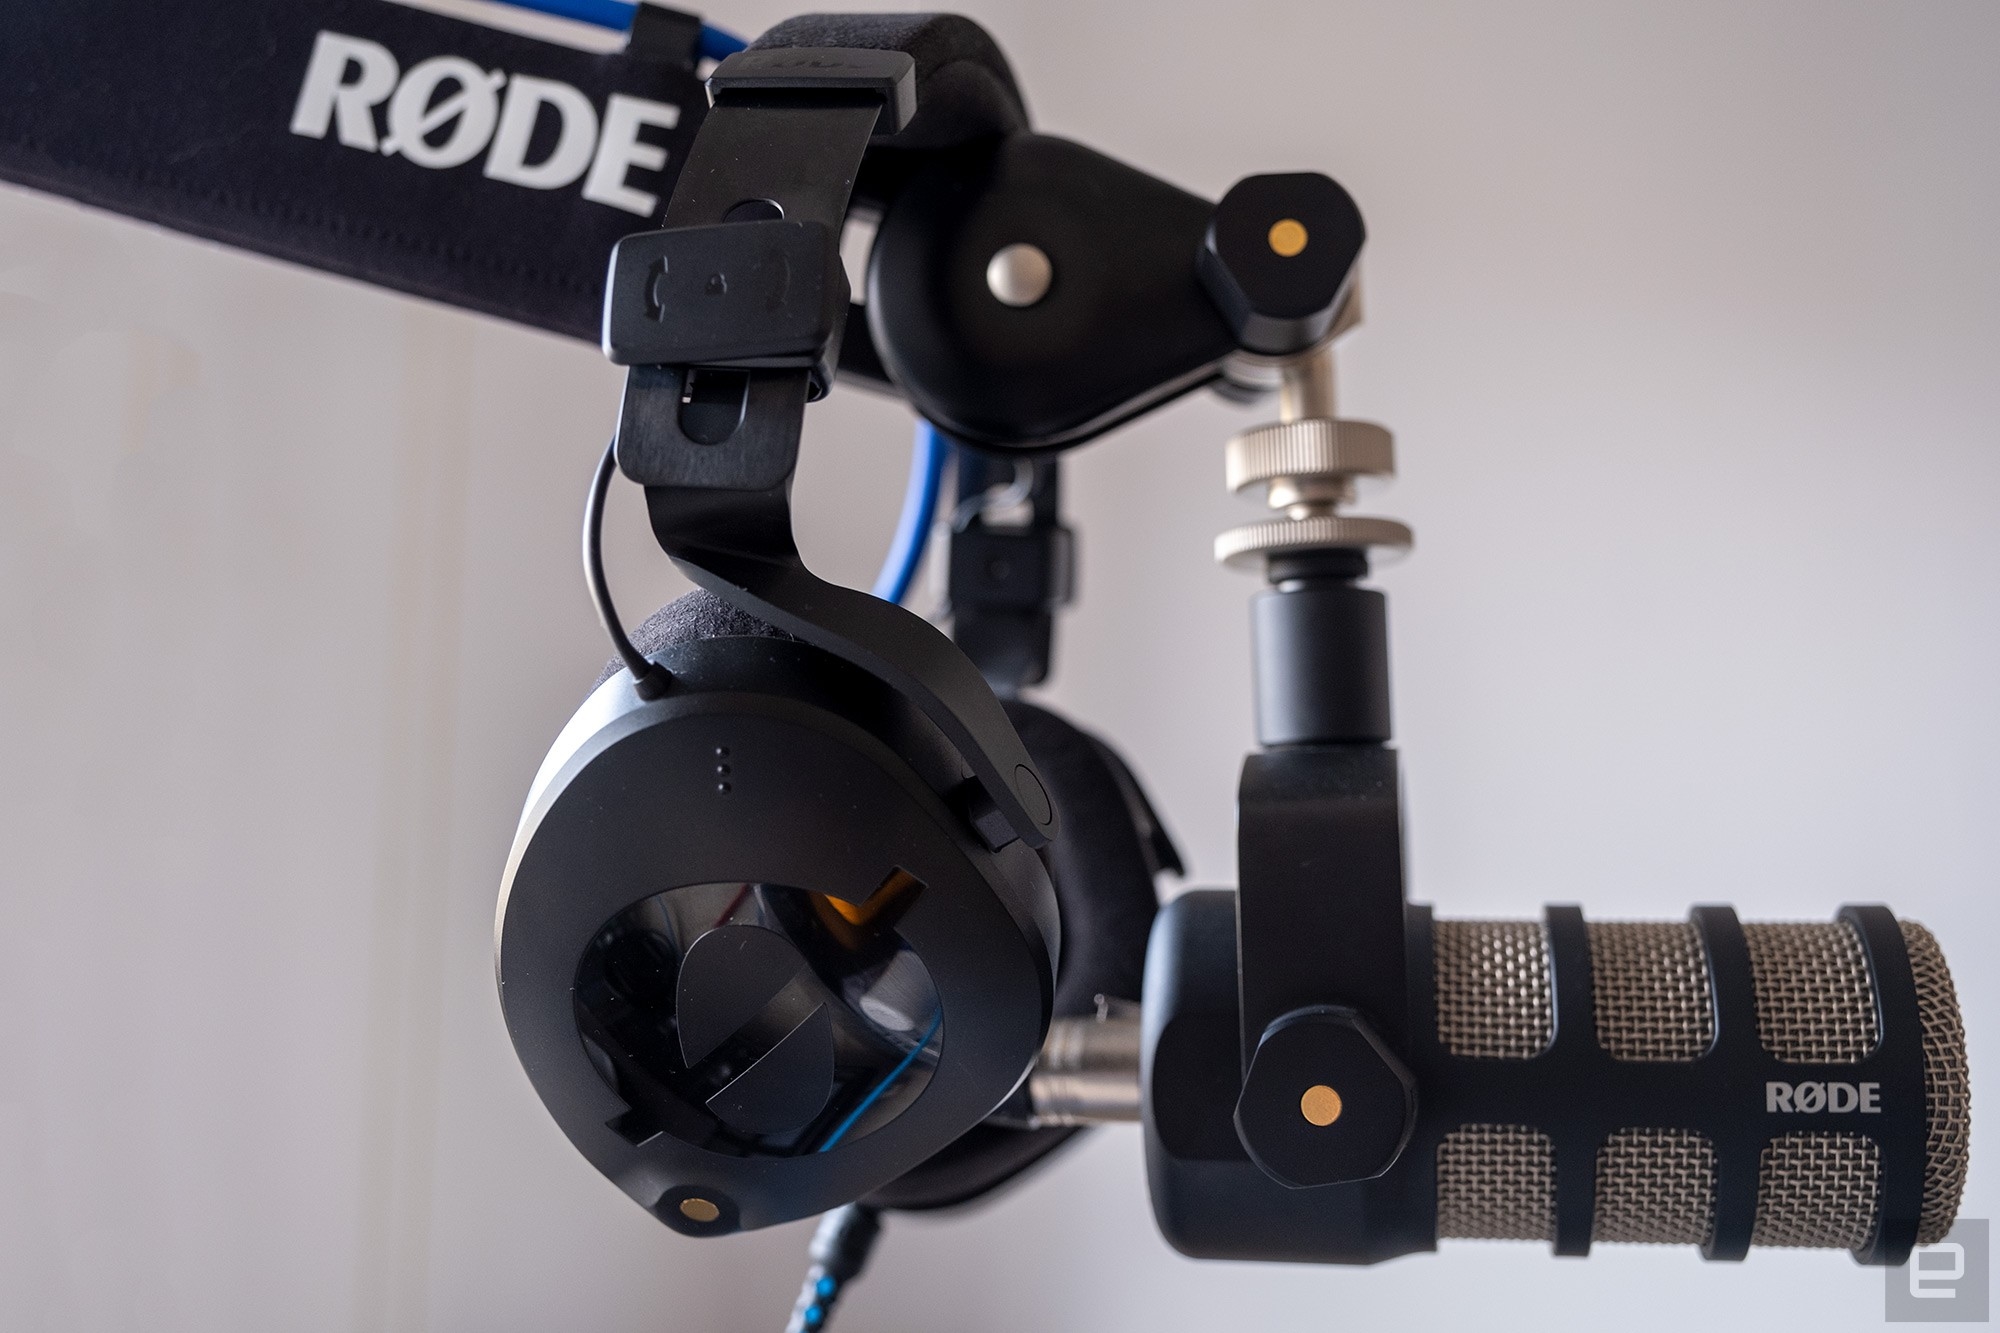 Rode's first headphones are the creator-focused NTH-100 | DeviceDaily.com